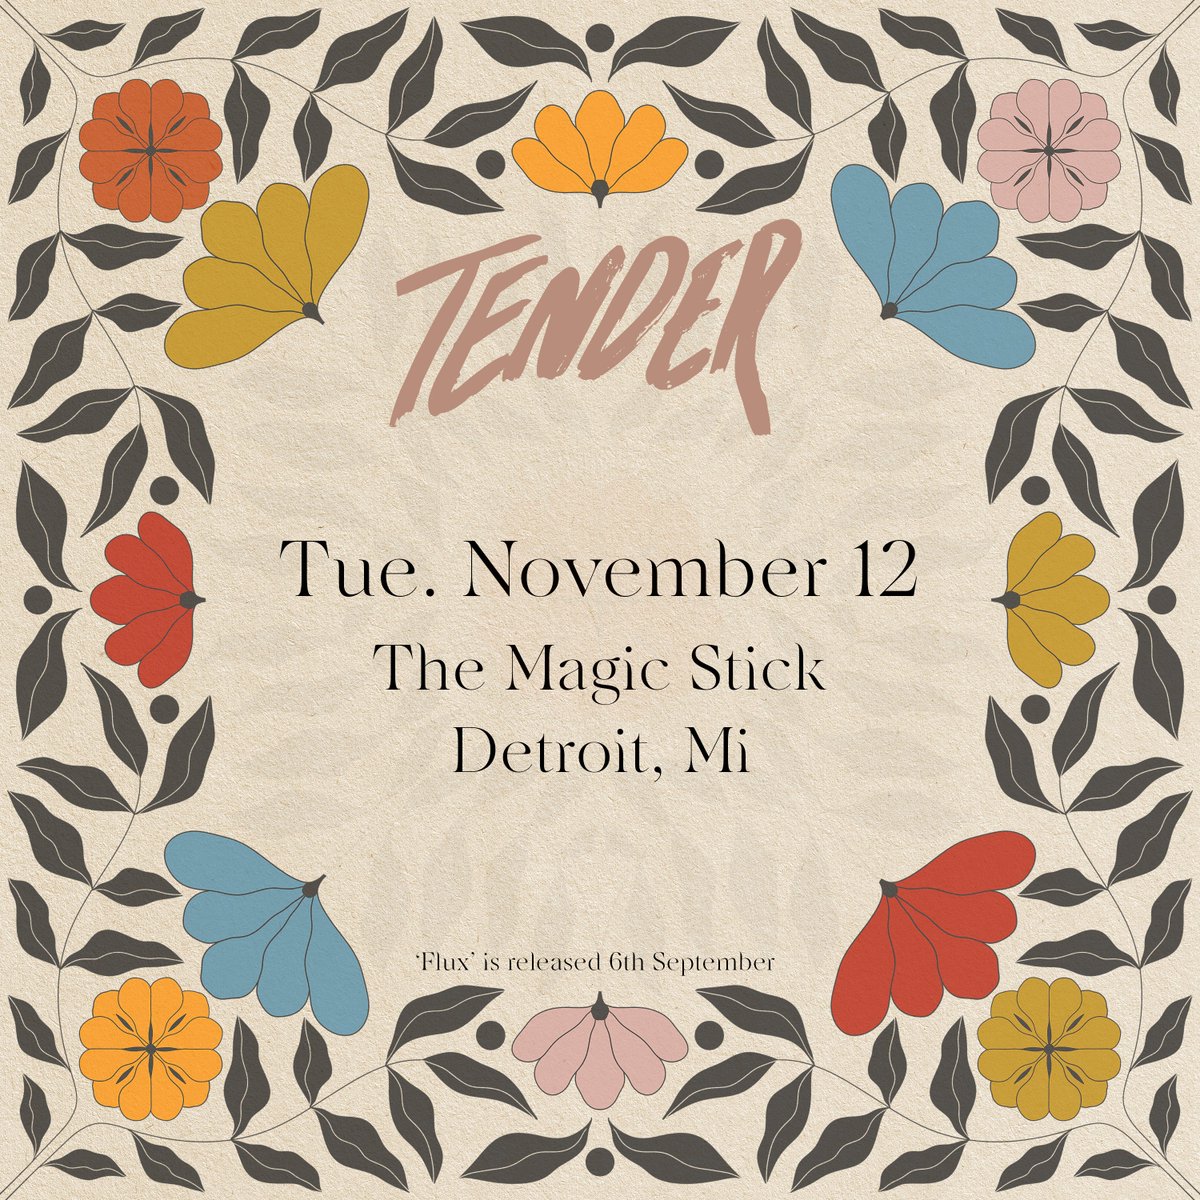 JUST ANNOUNCED 🌿 British electronic duo @tenderofficial live at the Magic Stick on November 12th! New album 'Flux' out September 6th ✨ Tickets on sale this Fri. 5/10 at 10am >> majesticdet.live/tender